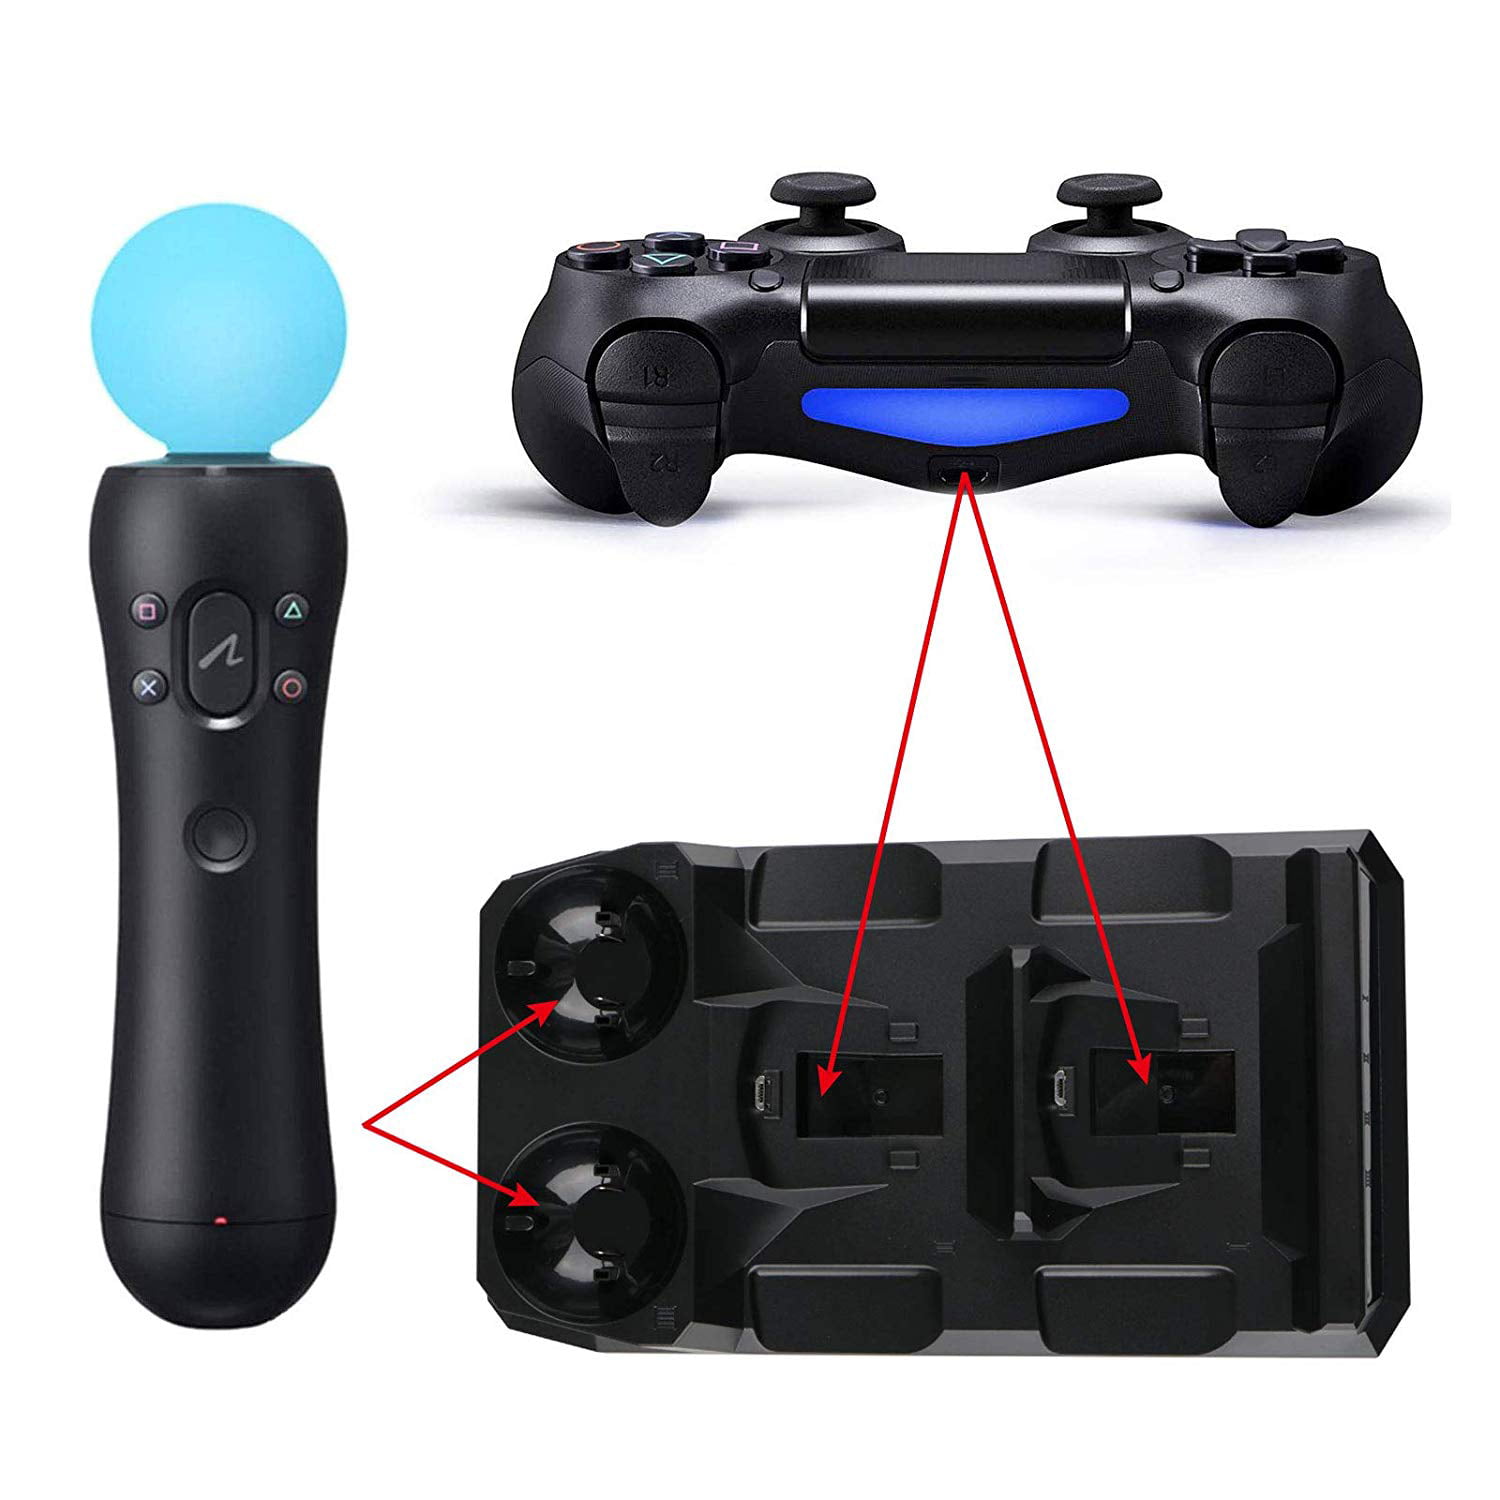 will ps3 move controllers work with ps4